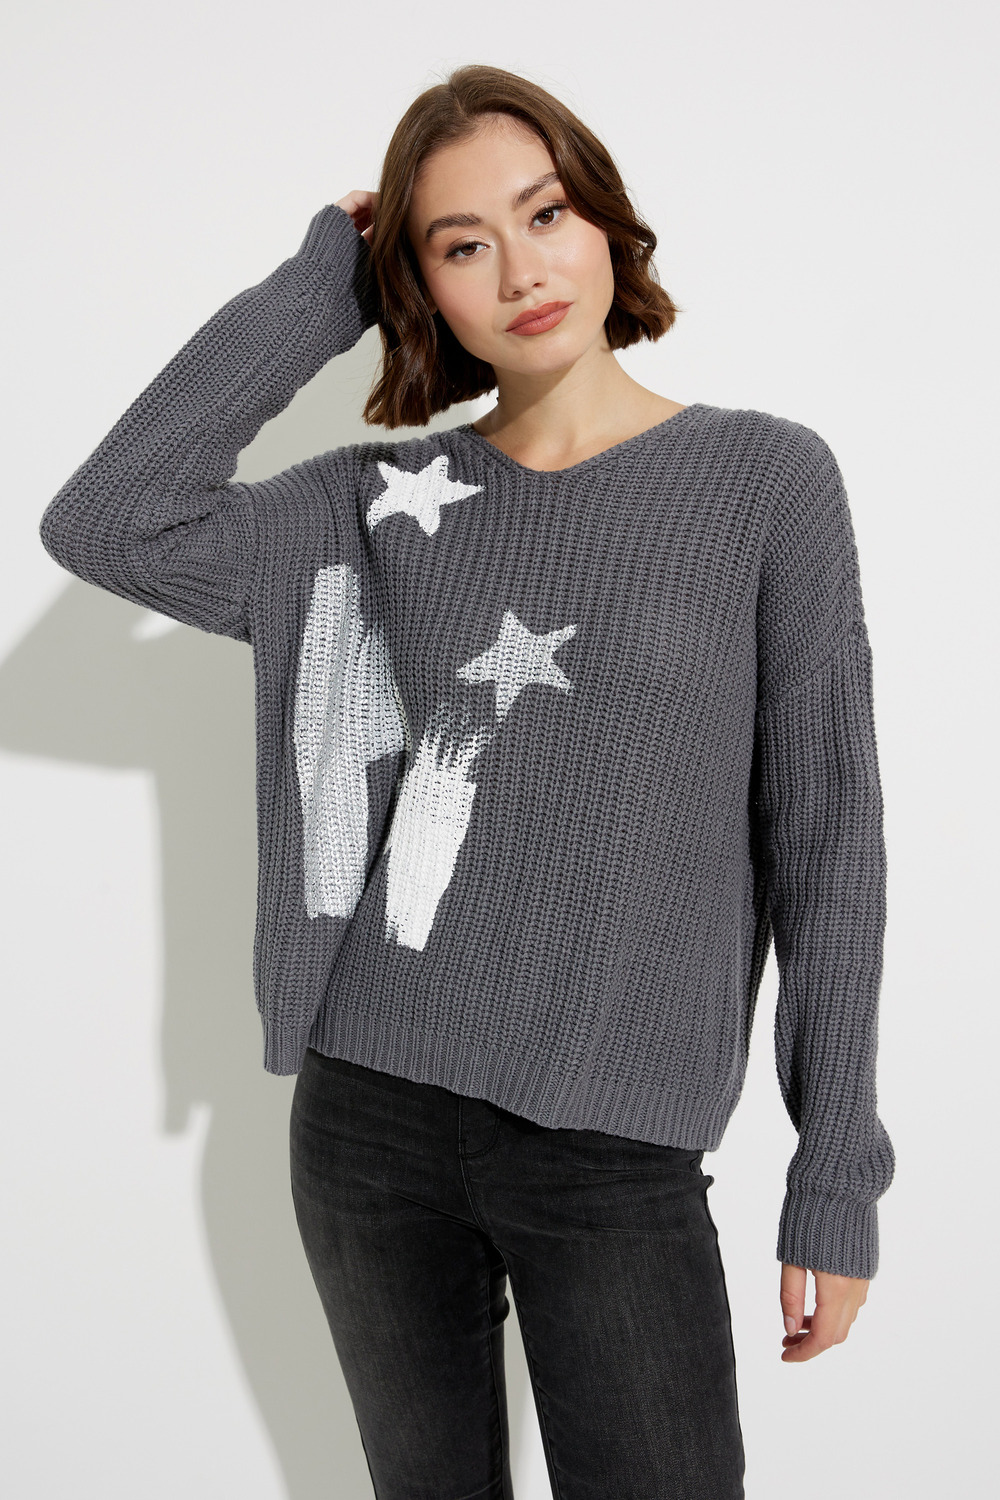 V-Neck Sweater with Stars Detail Print Style C2460. Charcoal